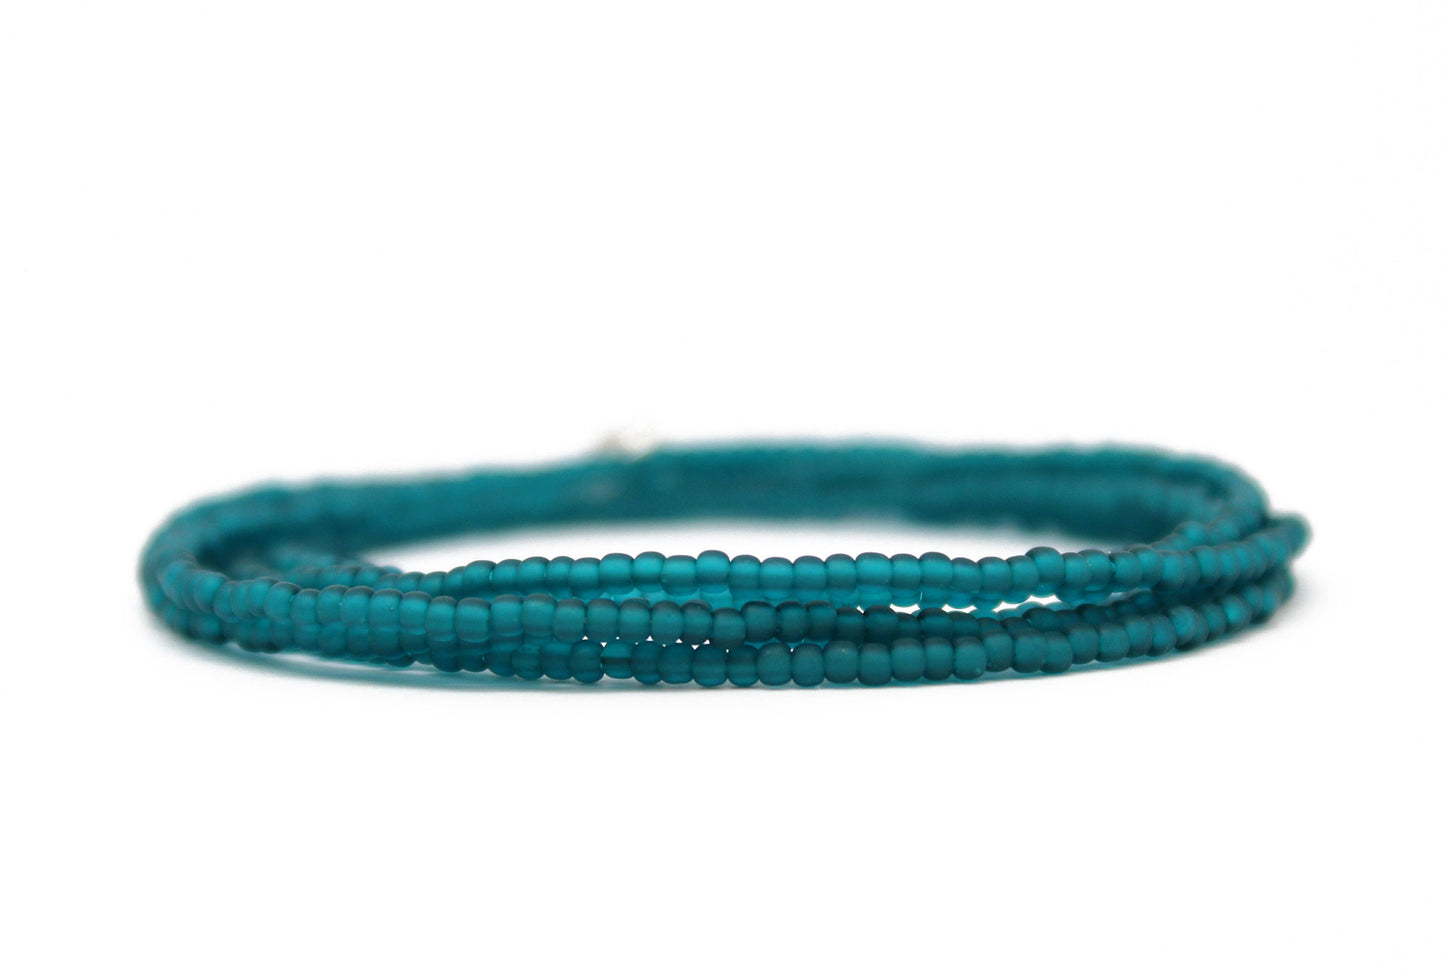 Teal Seed Bead Necklace-Blue Green Single Strand